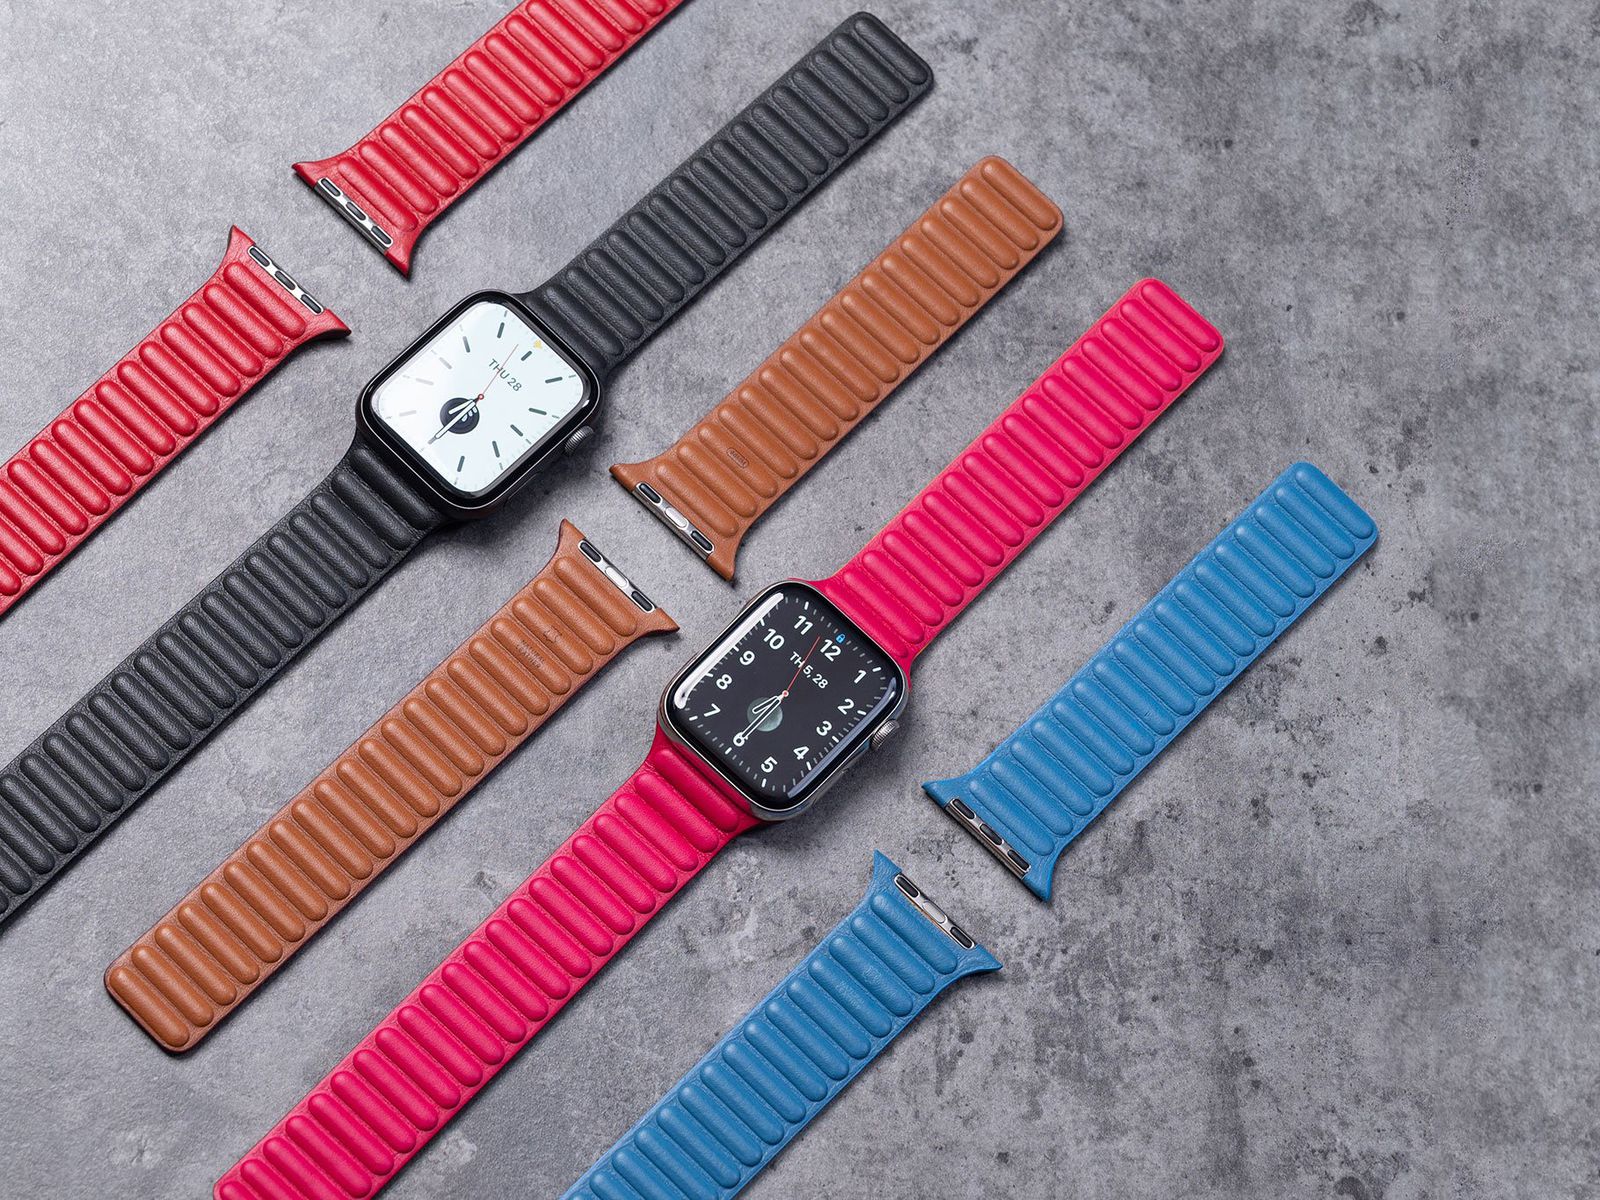 Forstyrre kassette format More Photos and Video of Apple's Redesigned Leather Loop Watch Band Surface  - MacRumors